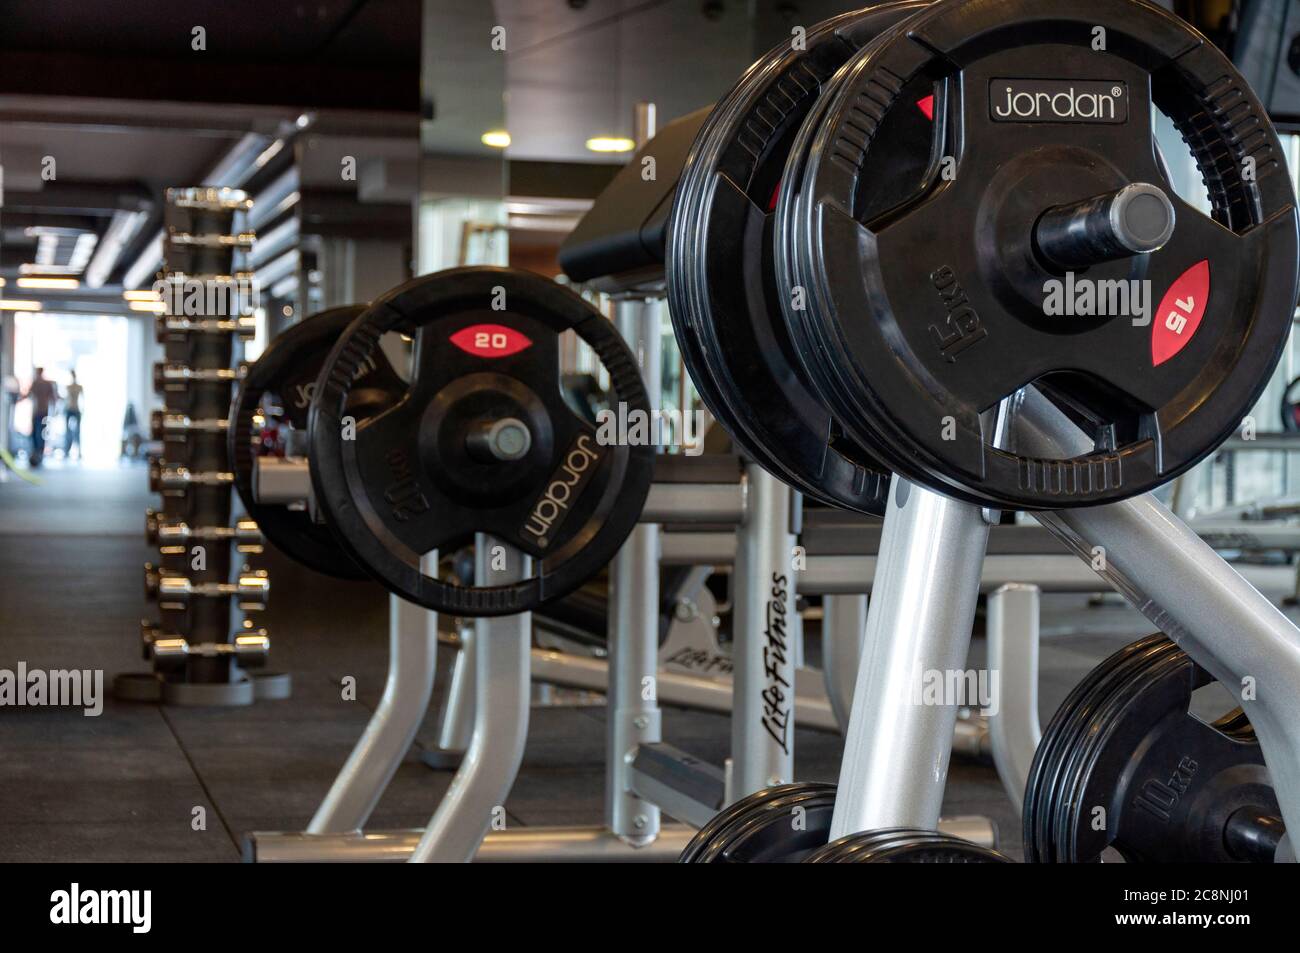 Jordan weight plates on Life Fitness shoulder press stands in empty gym  interior Stock Photo - Alamy